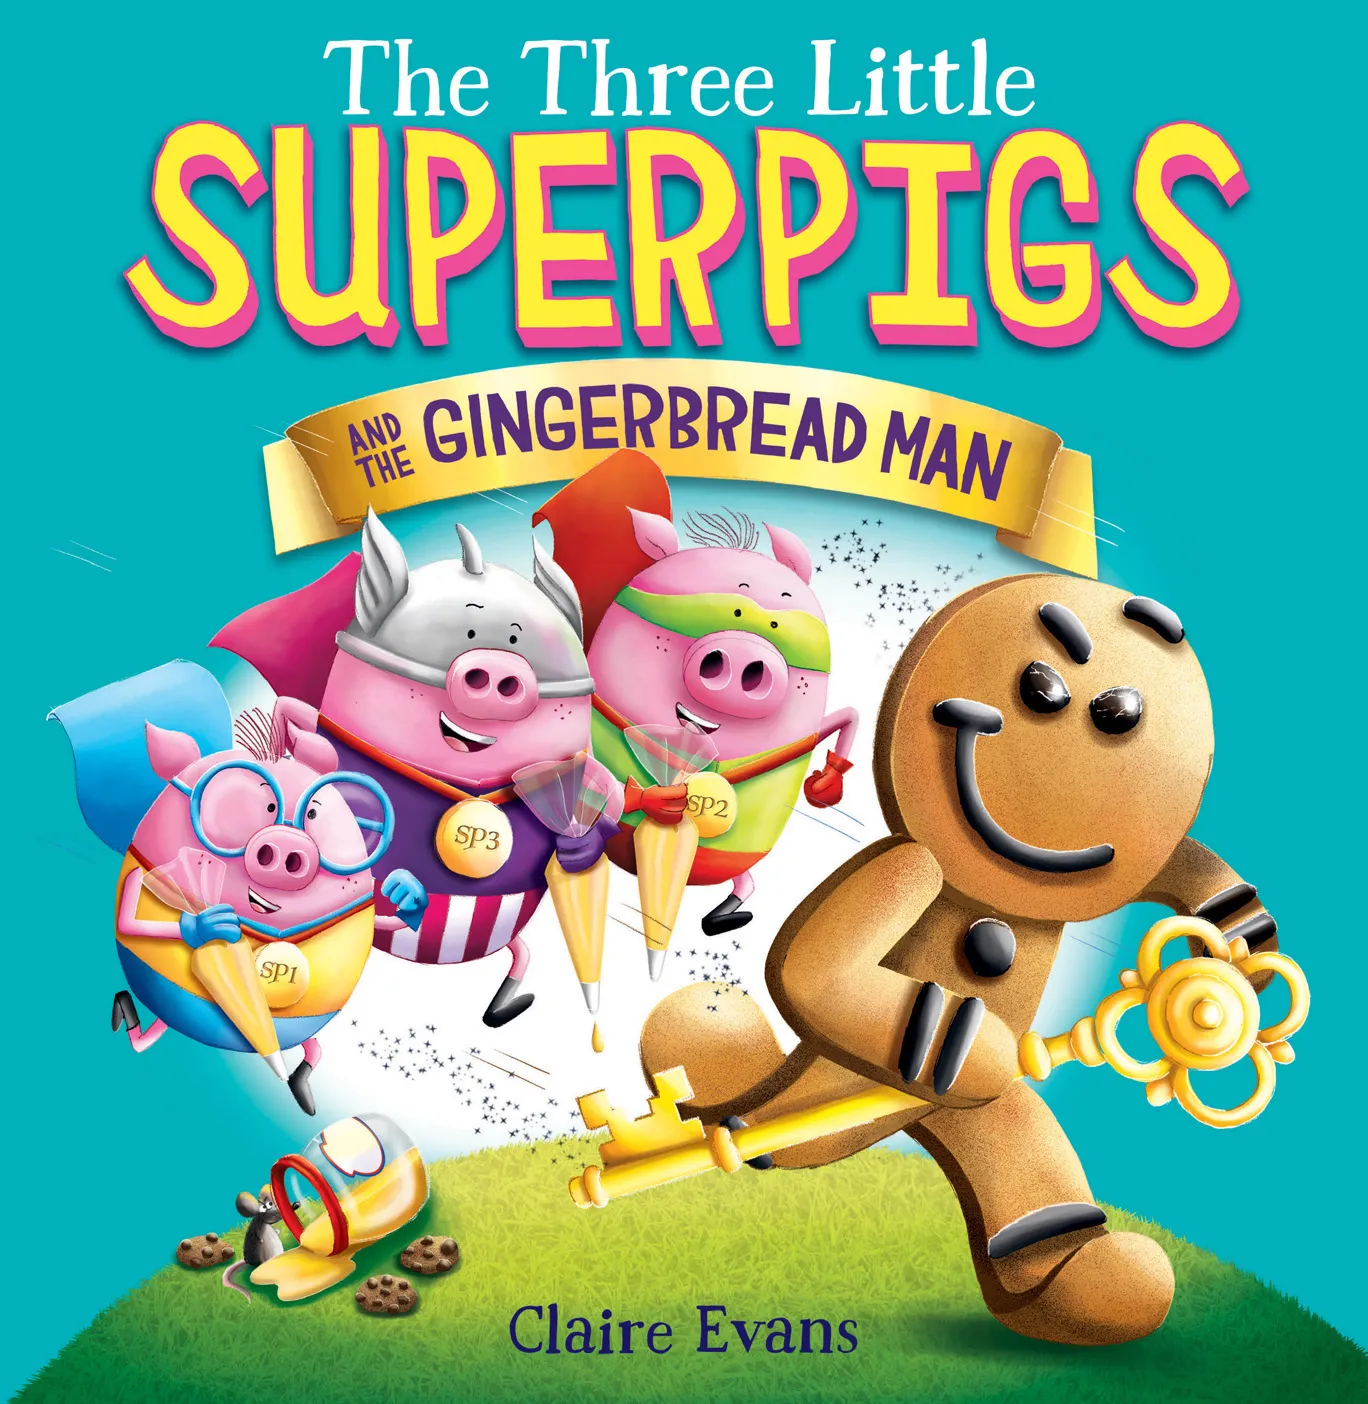 The Three Little Superpigs and the Gingerbread Man (The Three Little Superpigs)